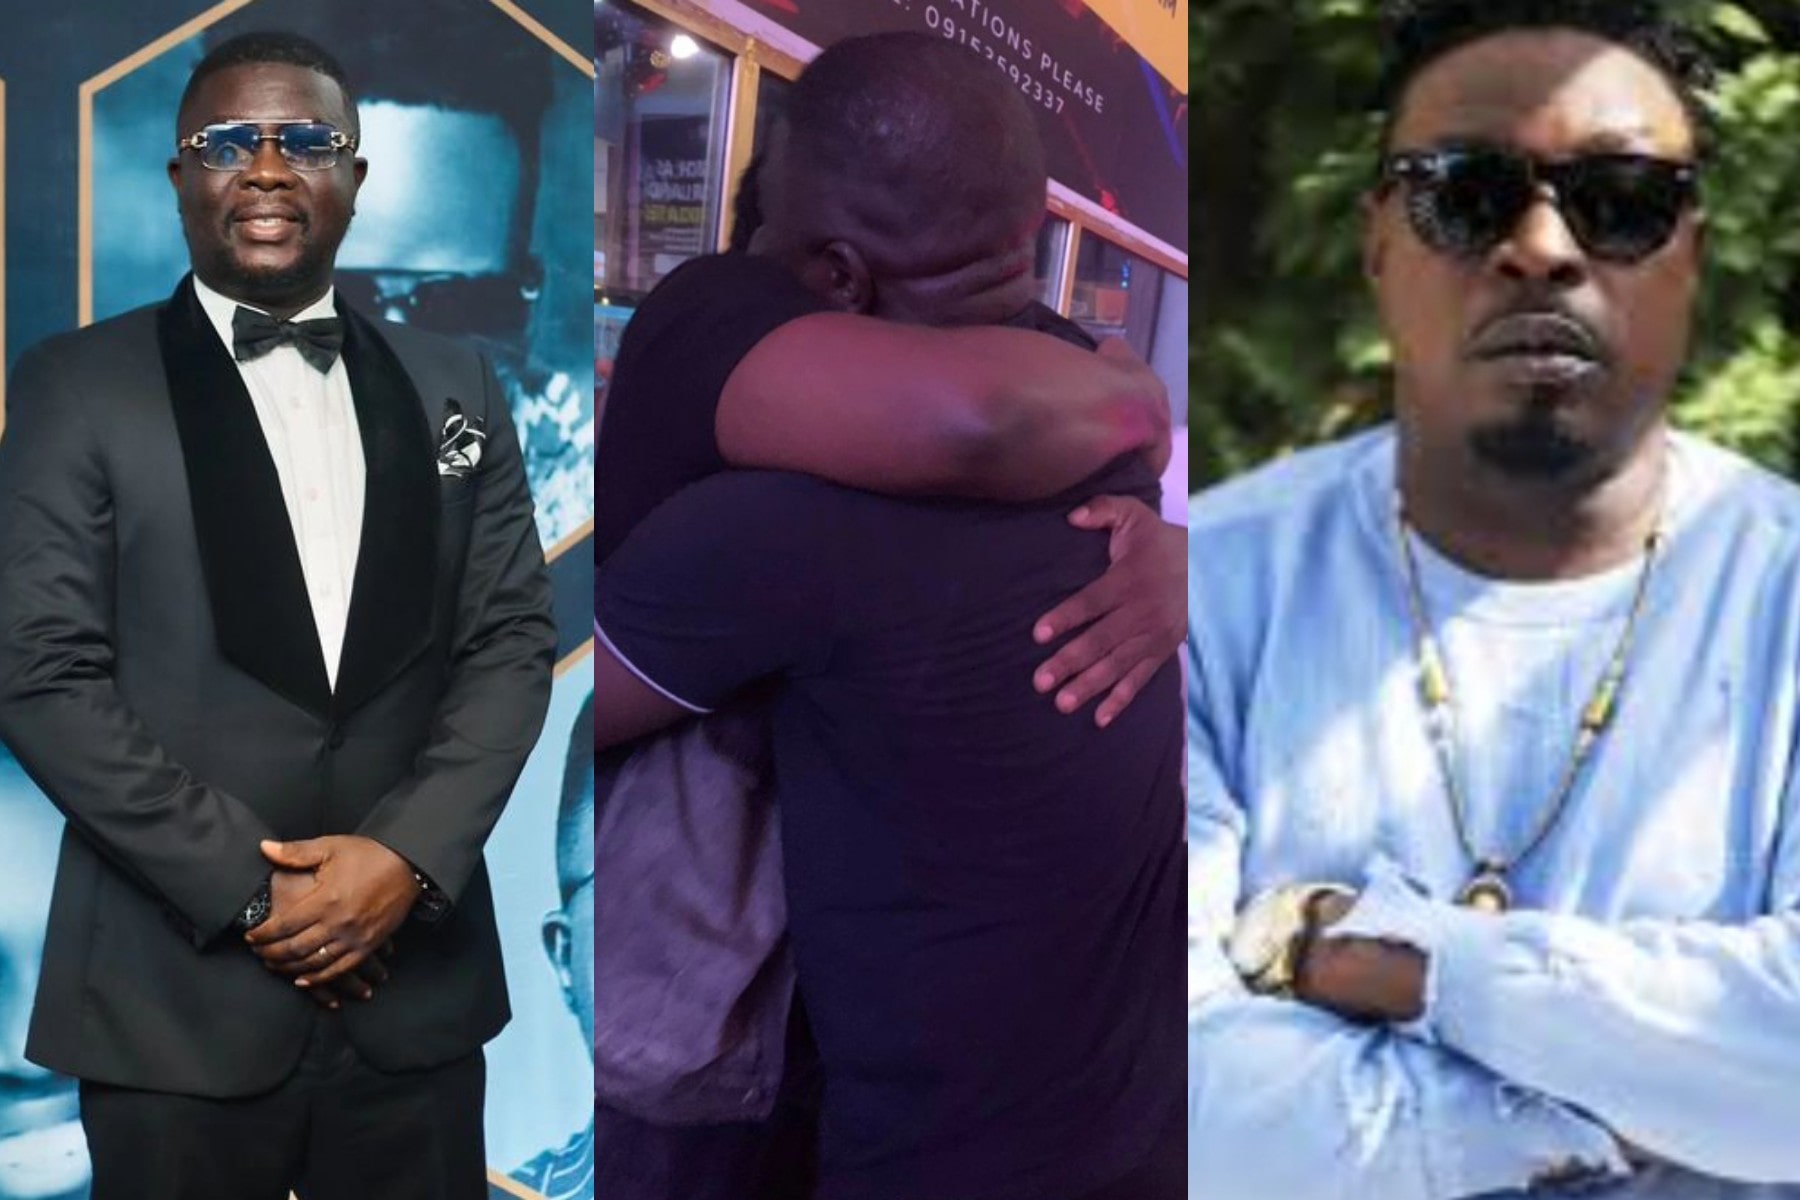 “The backlash you have received from different people gets to me” Seyi Law sends heartfelt message to Eedris Abdulkareem, days after clashing online